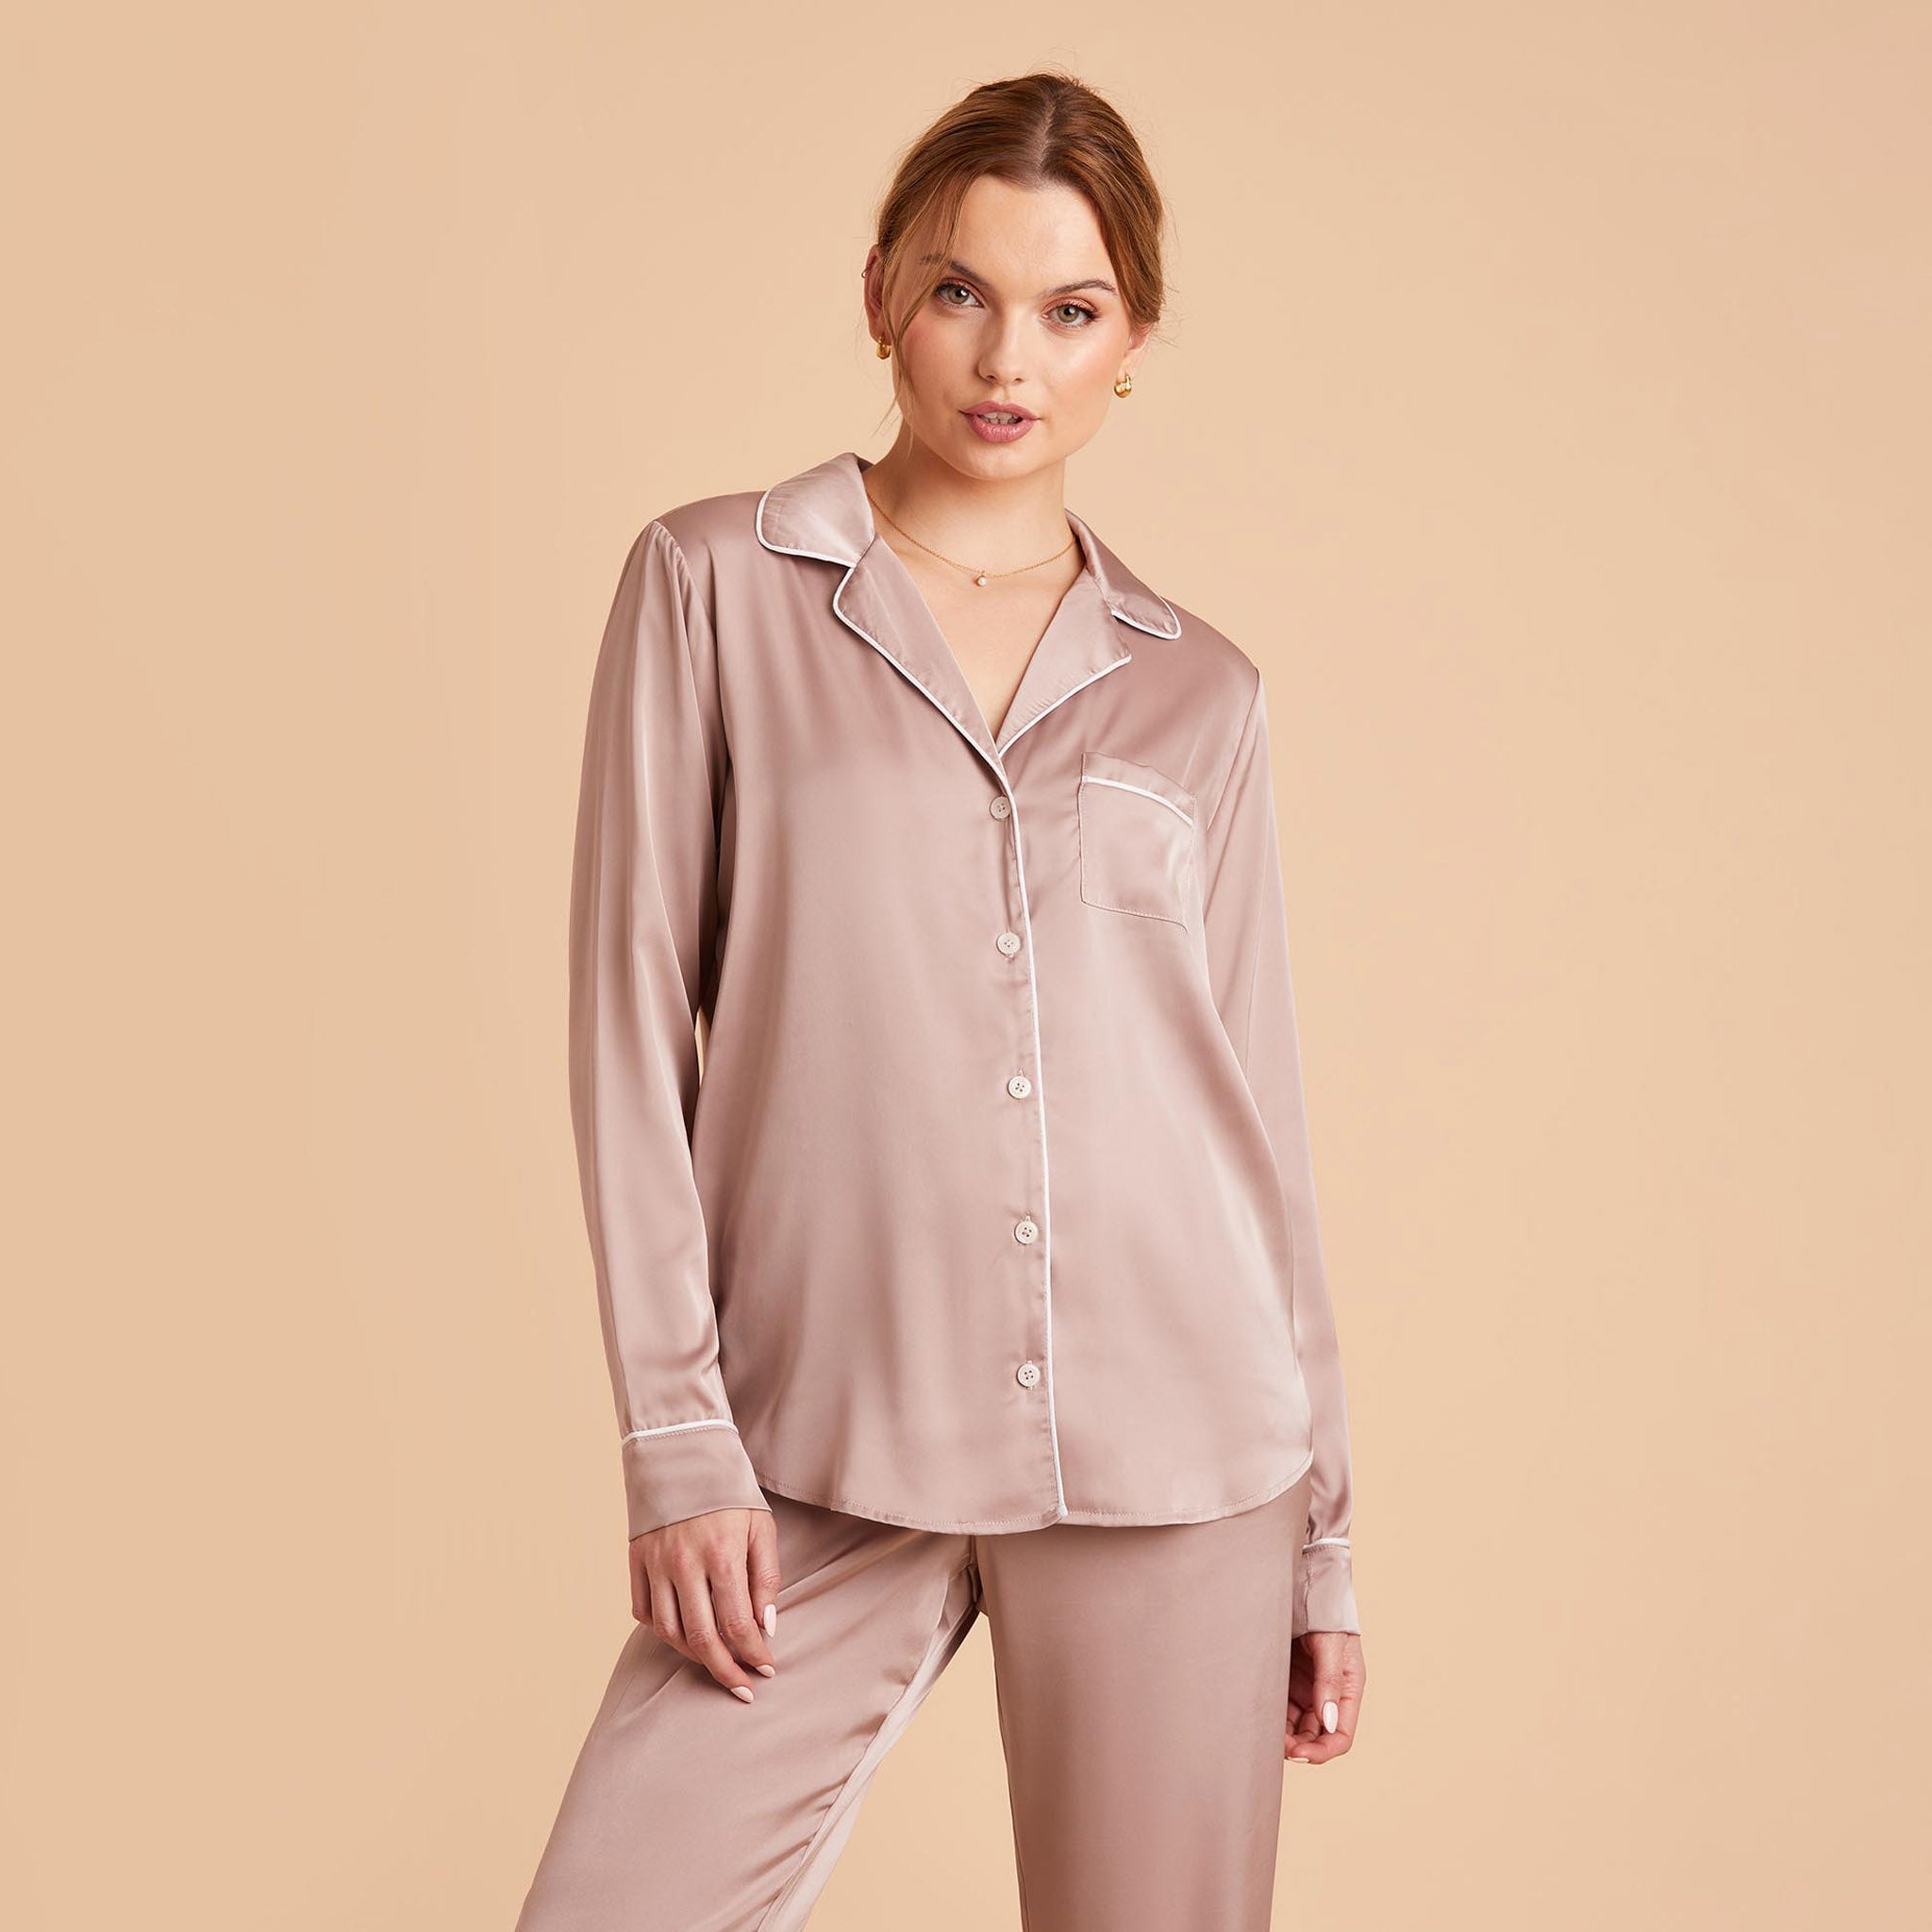 Jonny Satin Long Sleeve Pajama Top With White Piping in mauve taupe, front view